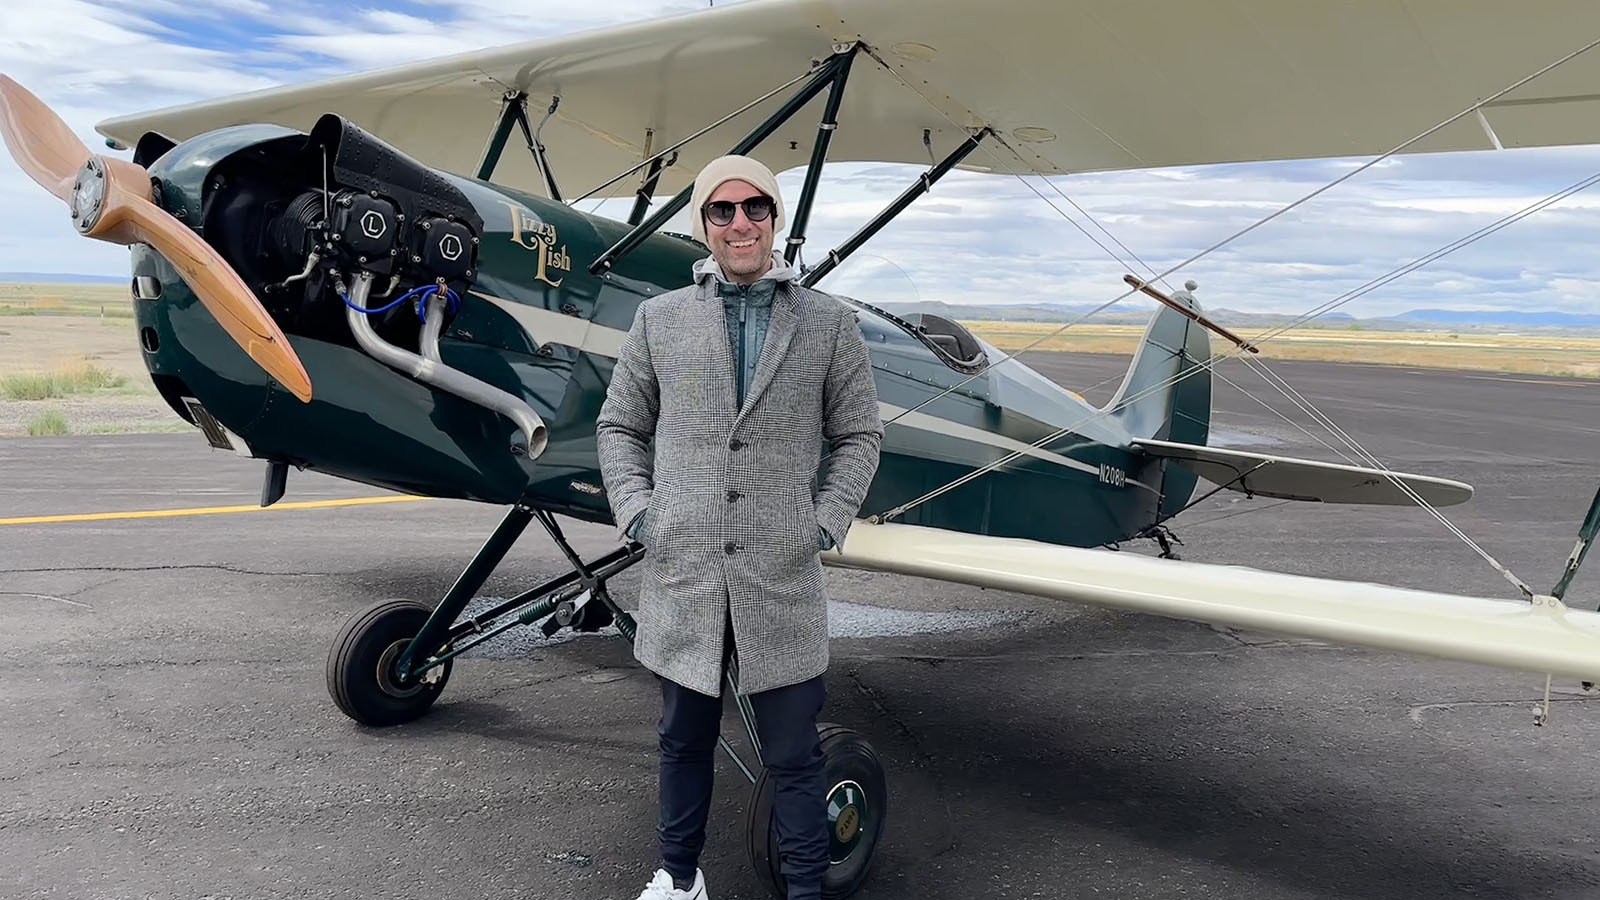 Pilot Kevin Garcia flew the Tizzy Lish to its new home in Lovell, Wyoming.